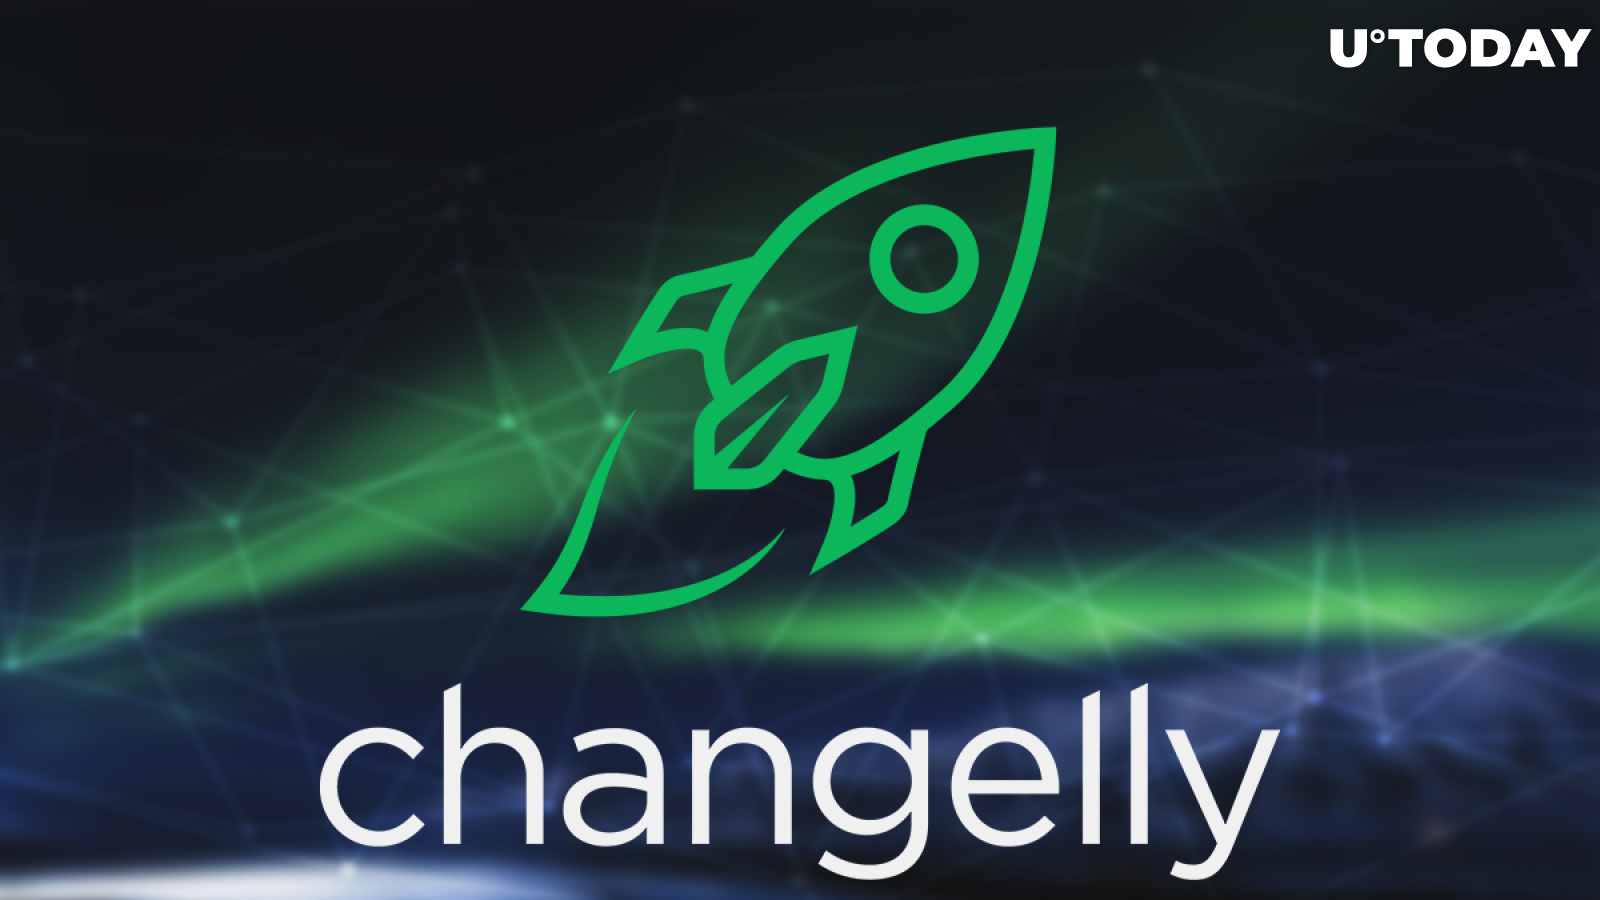 Changelly to Let Users Buy and Sell Crypto on Smartphones via New Mobile Widget 2.0